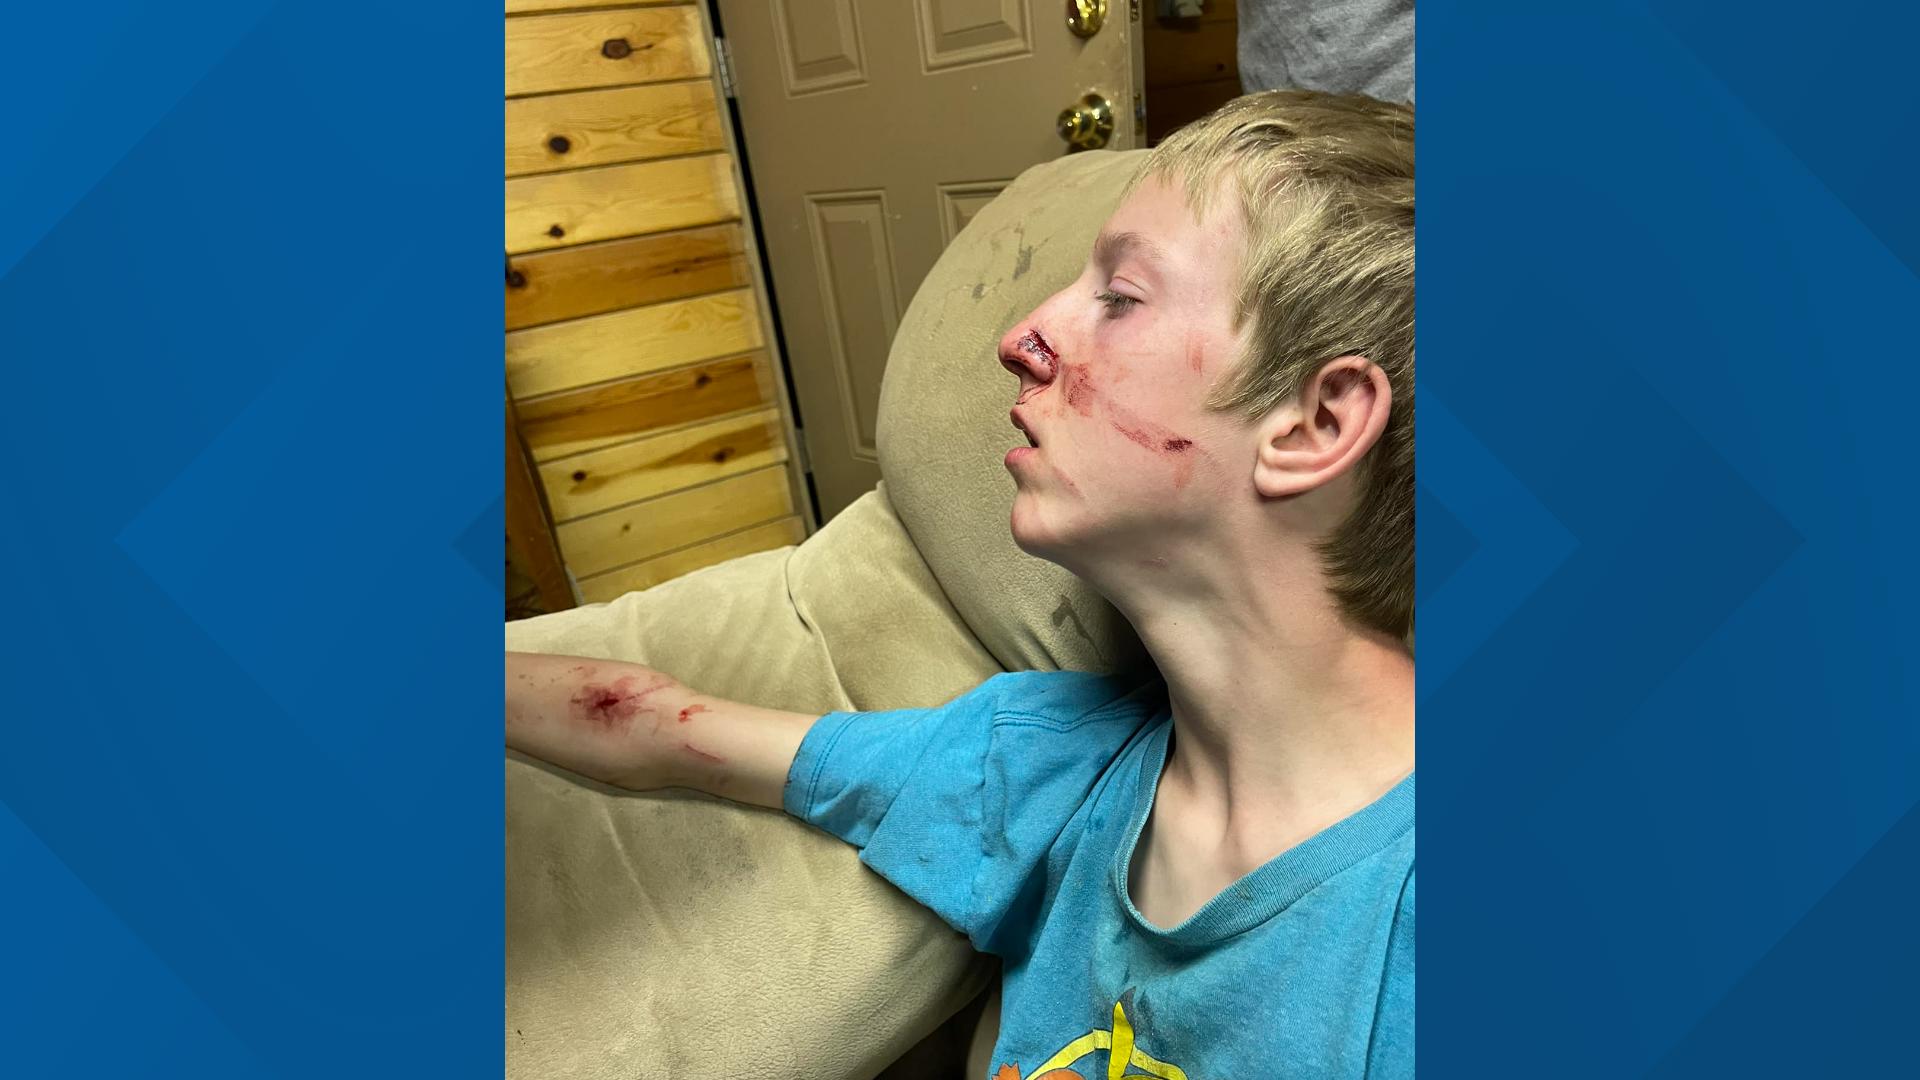 15-year-old Brigham Hawkins was watching TV when a bear walked inside and attacked him. 12News spoke to his mother about the incident on Saturday.